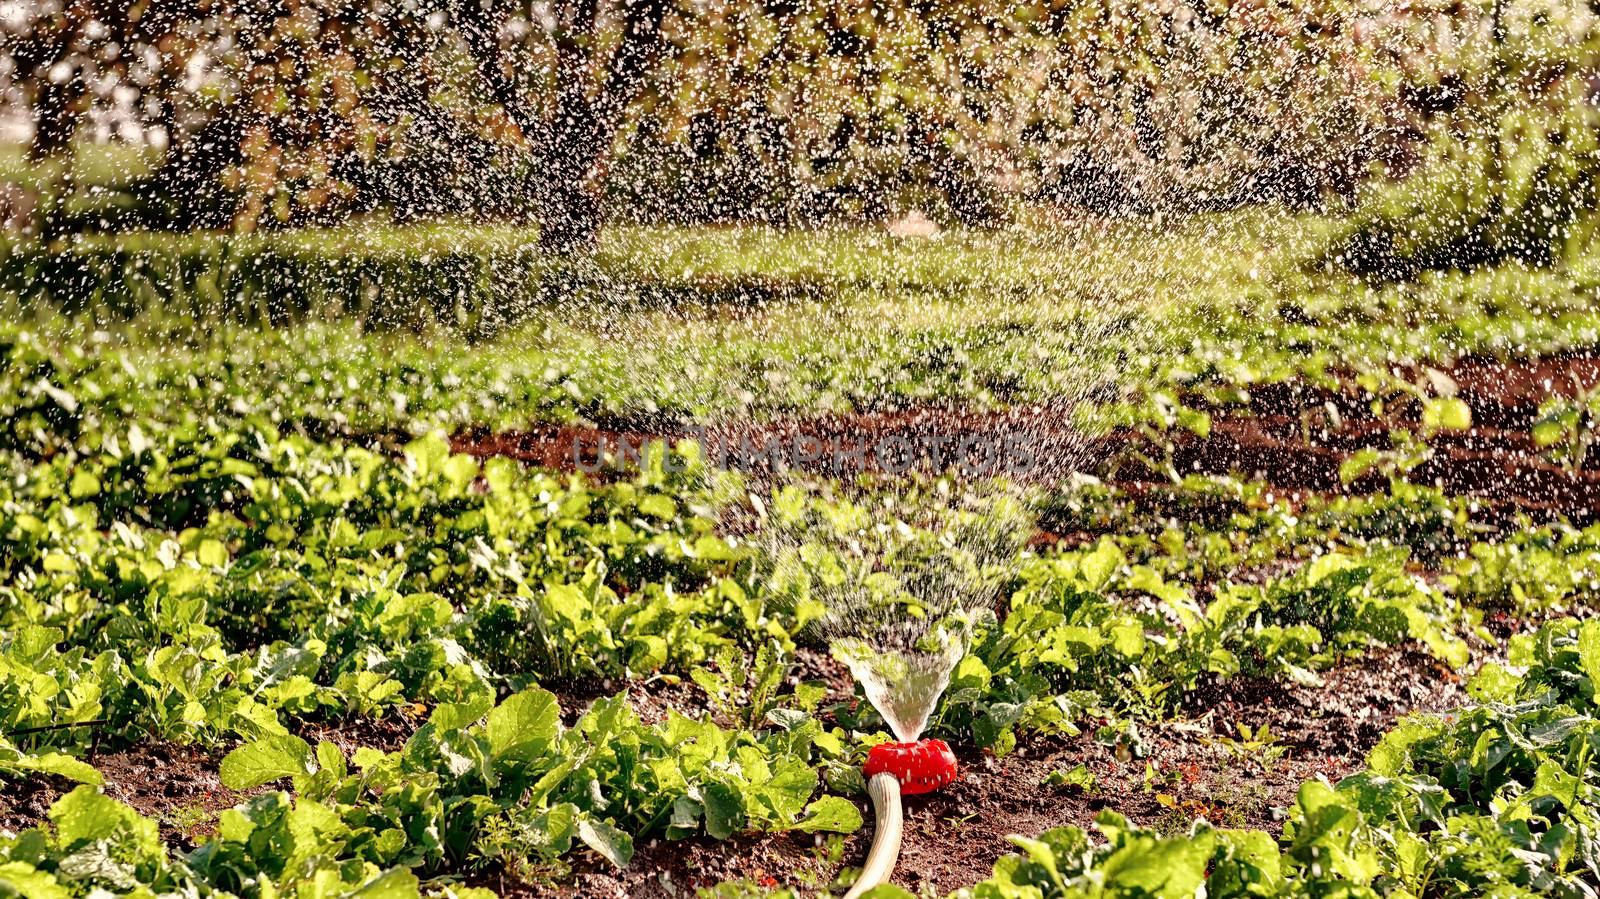 Pouring plants in a vegetable garden .